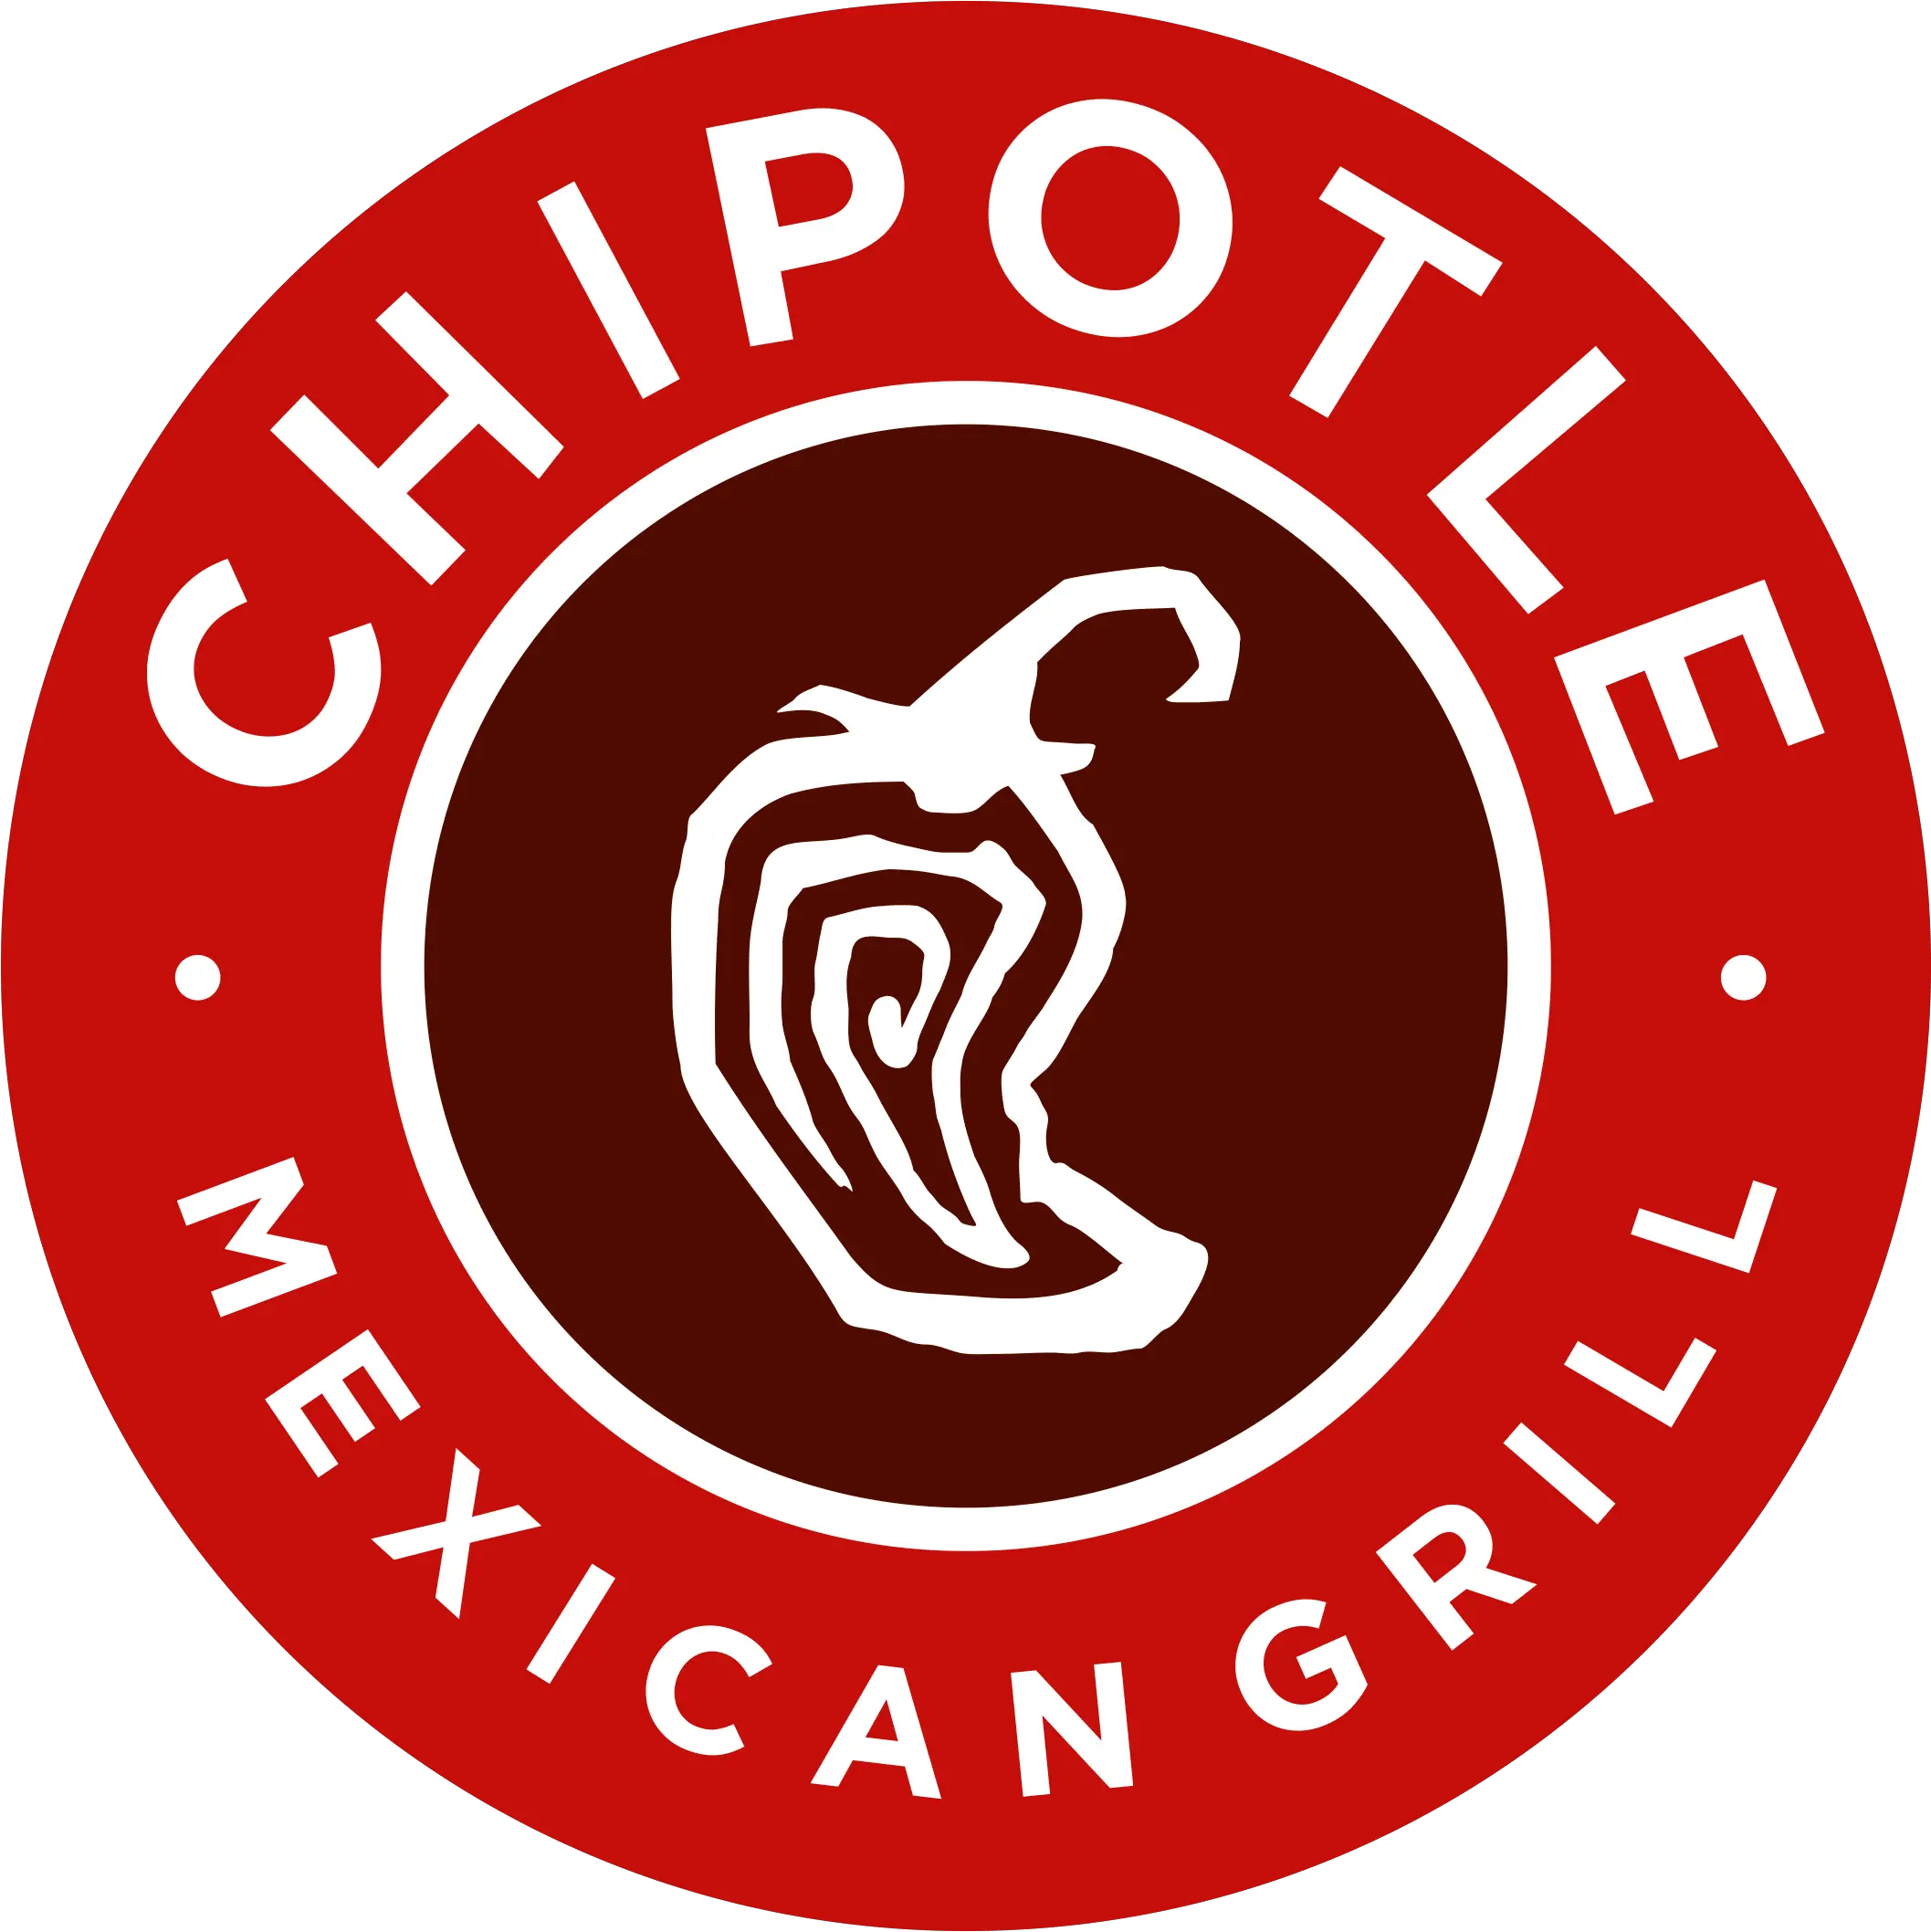 Chipotle Logo Chipotle Mexican Grill Png Chopped Logo